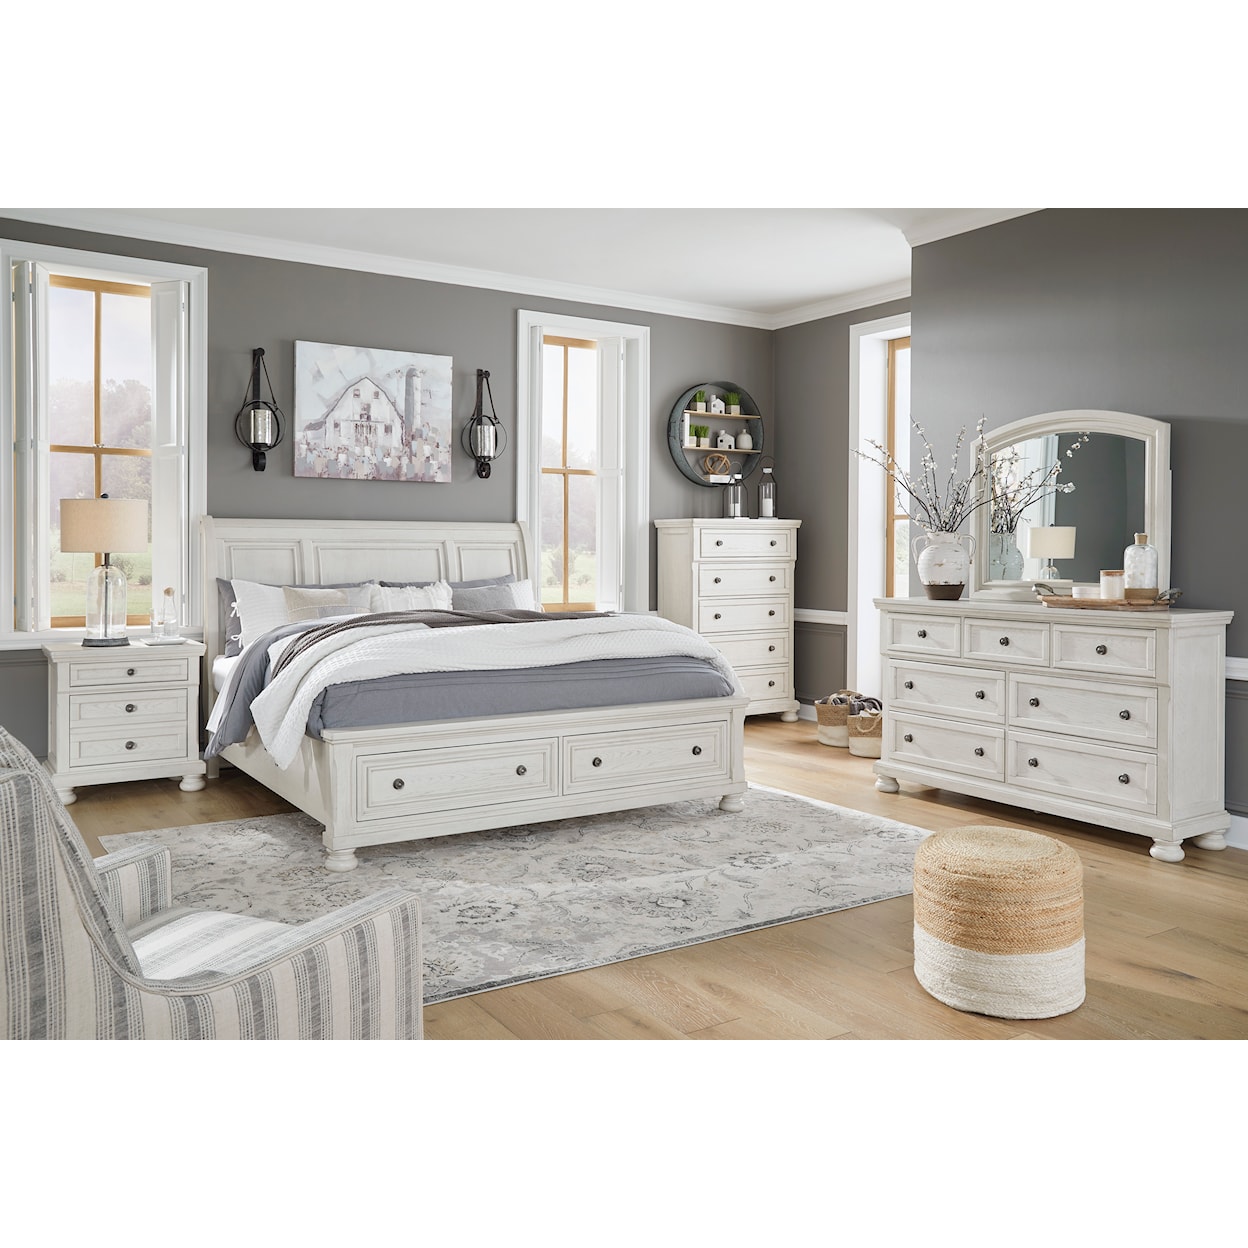 Ashley Robbinsdale Robbinsdale Queen Sleigh Bed with Storage